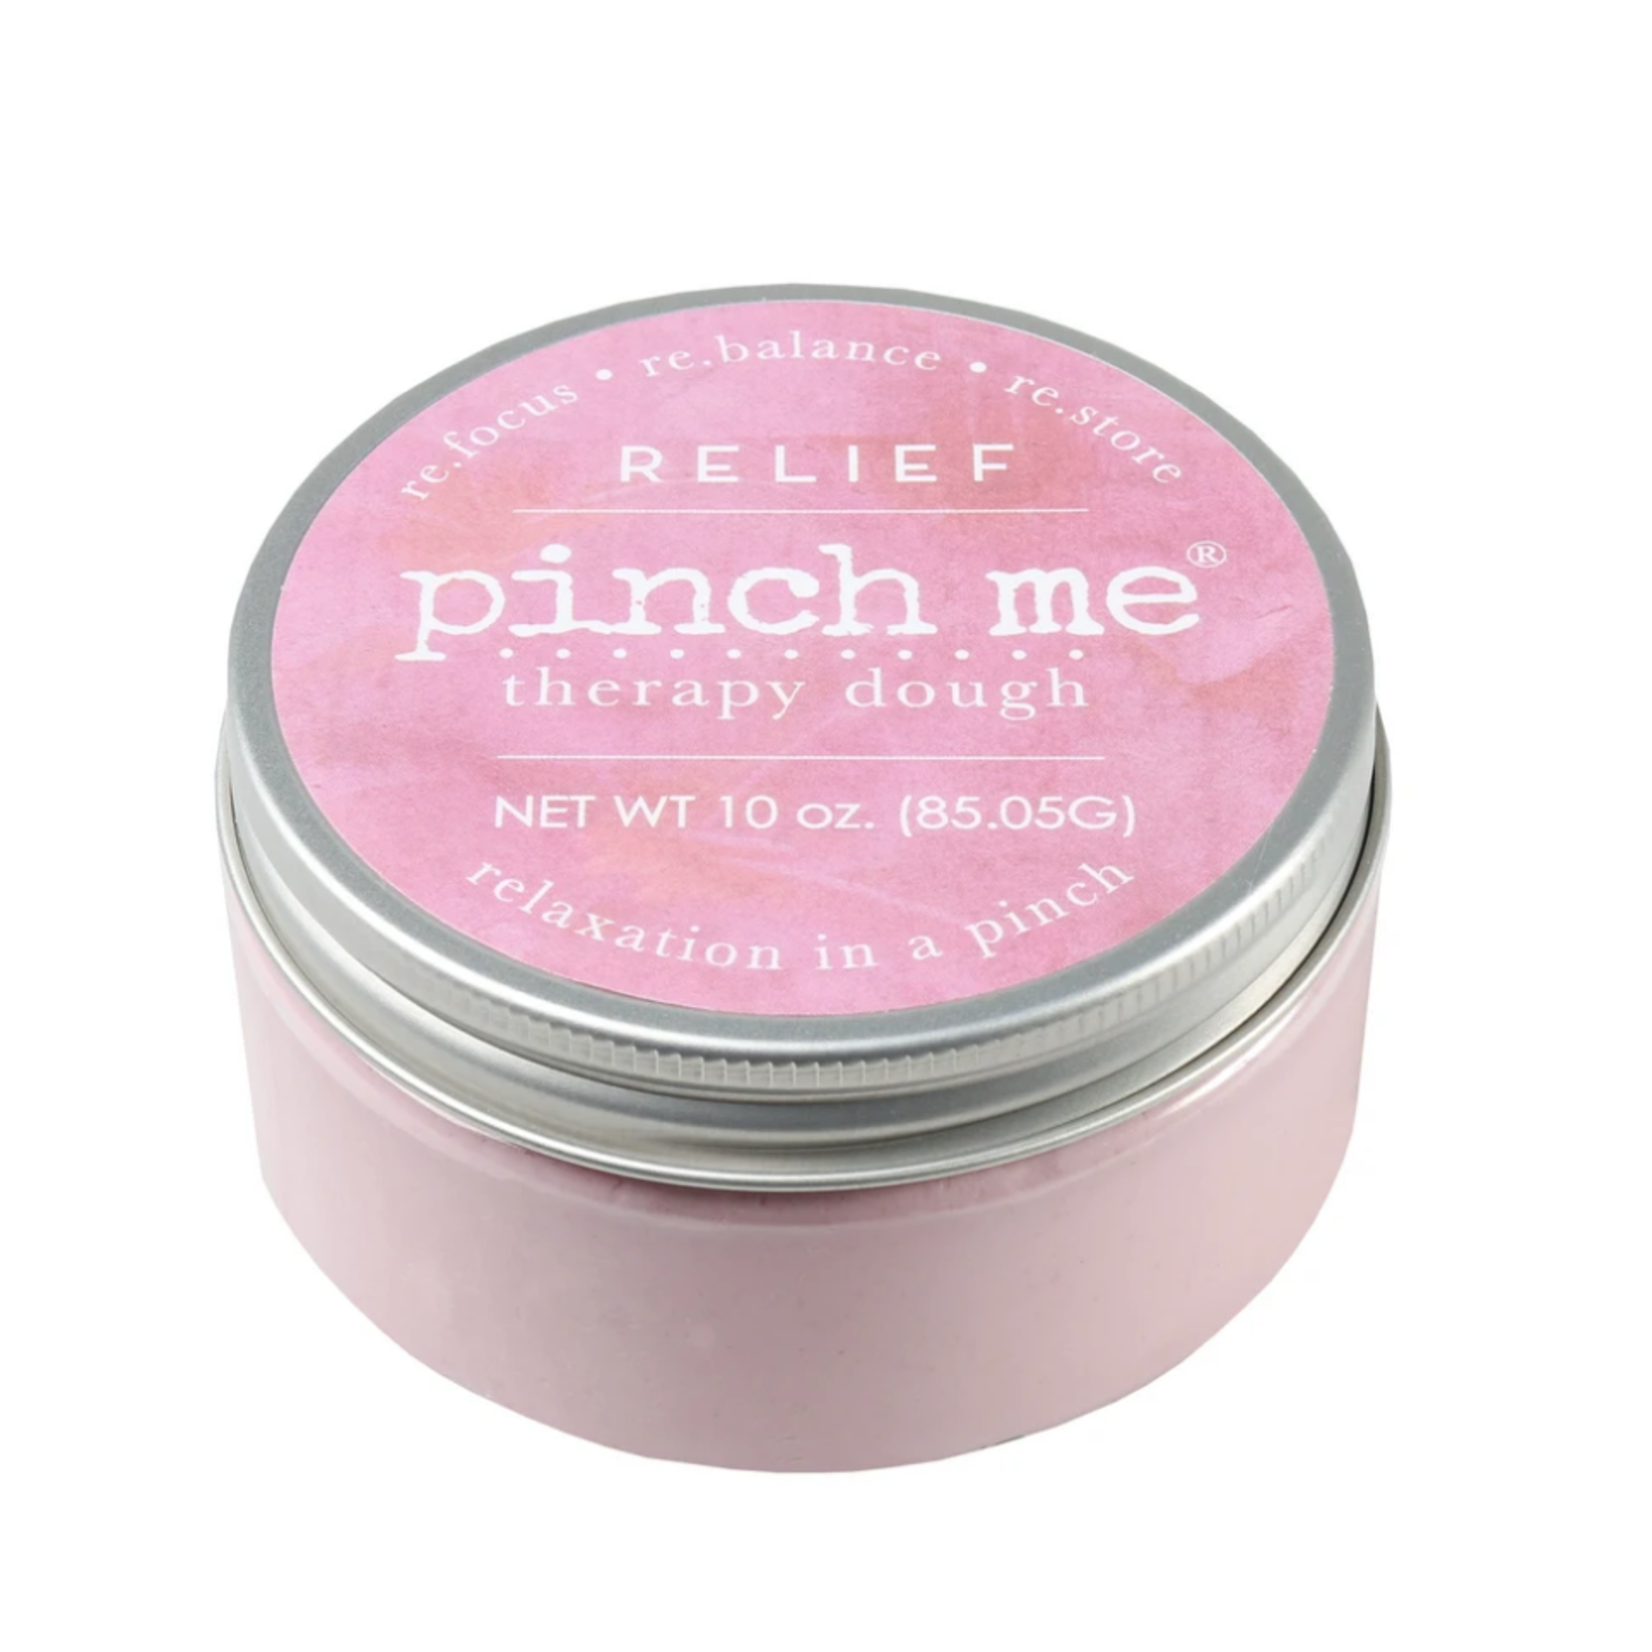 Pinch Me Therapy Dough 3oz - Relief